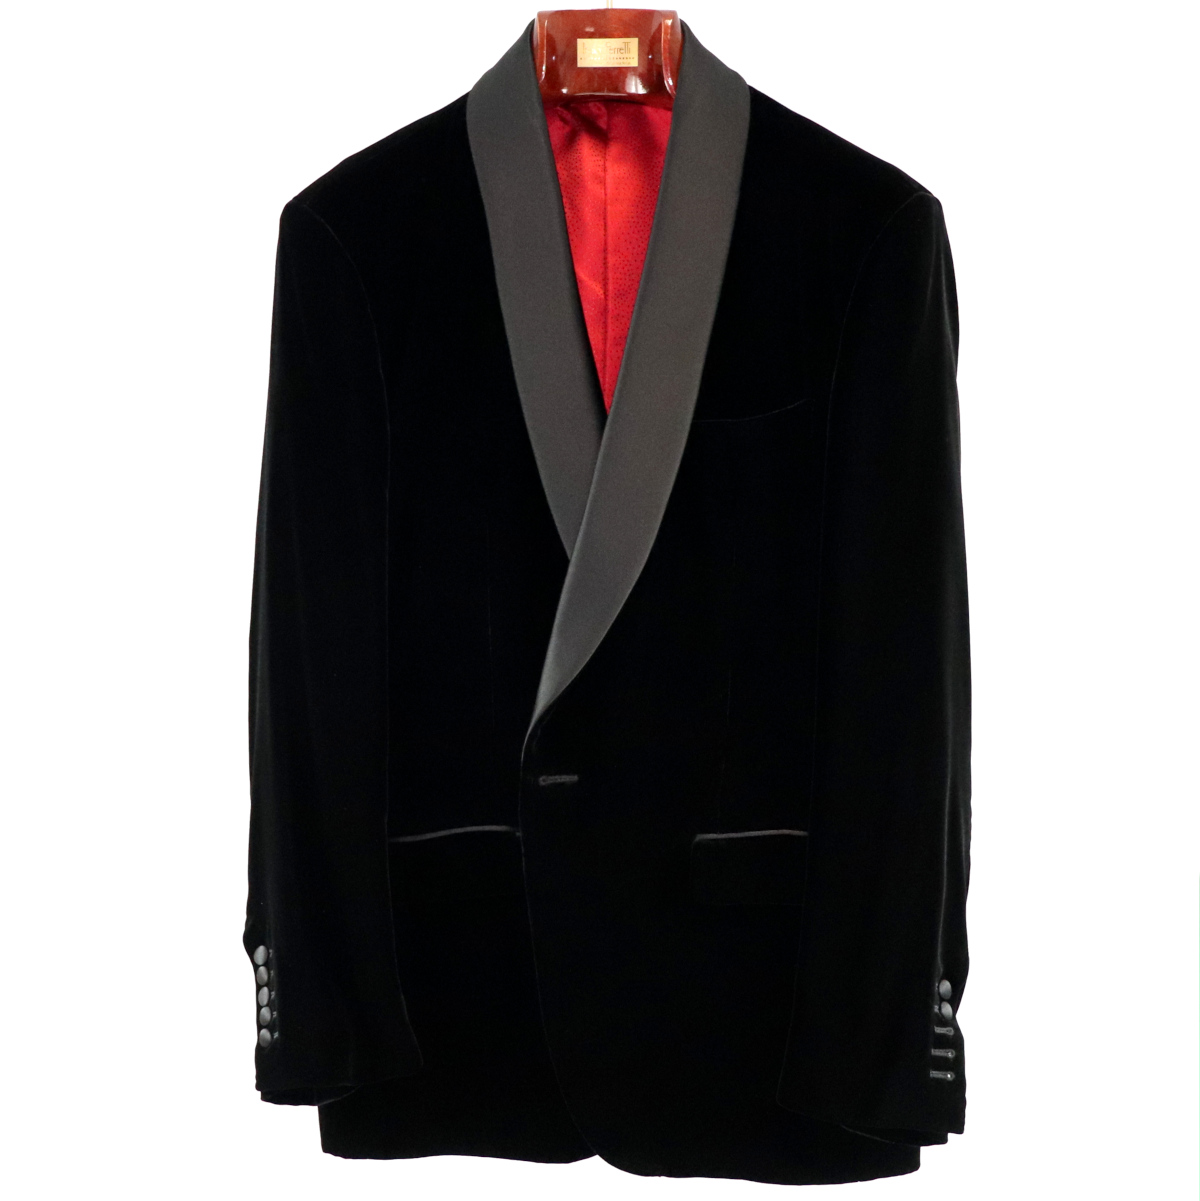 High Quality Red Velvet Mens Velvet Tuxedo Wedding With Black Shawl Lapel  Includes Jacket, Pants, And Tie Style 611 From Good Happy, $83.79 |  DHgate.Com